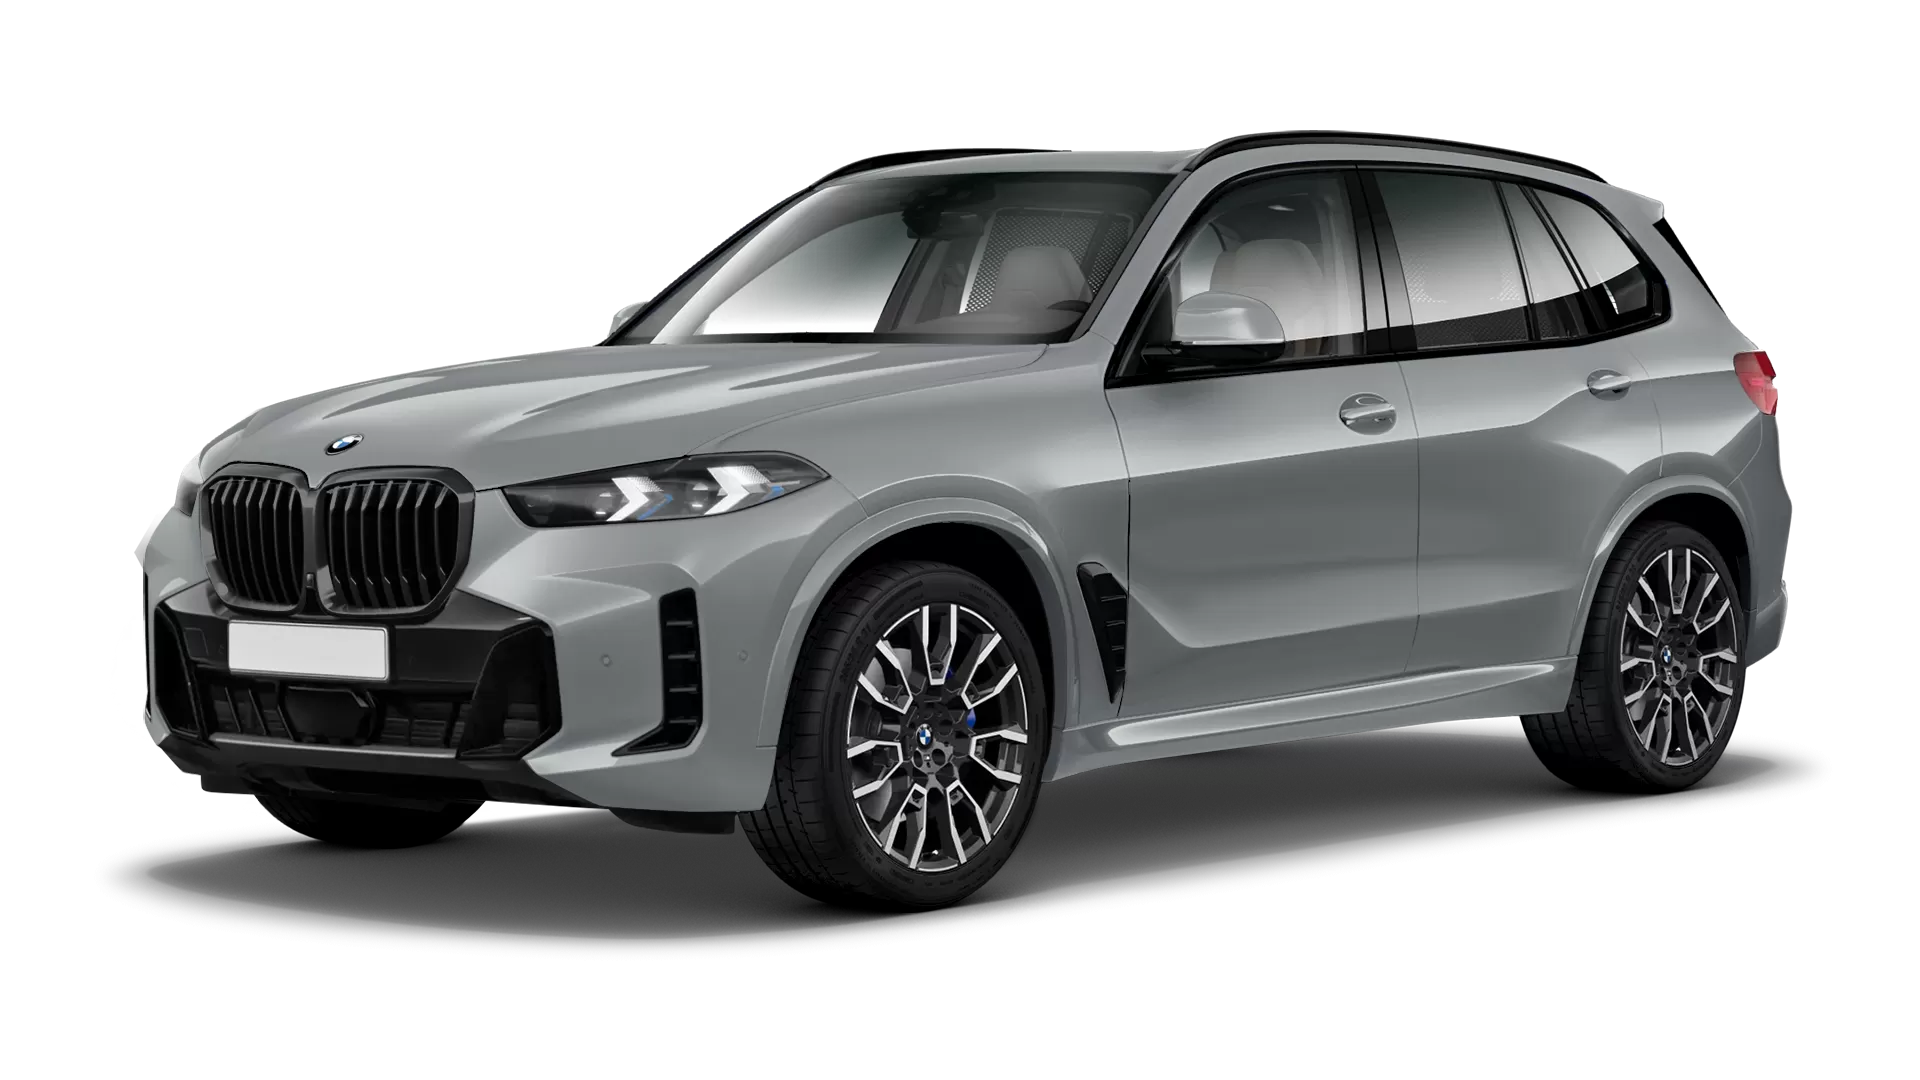 BMW X5 G05 LCI Facelift with painted body kit: front view shown in Brooklyn Grey